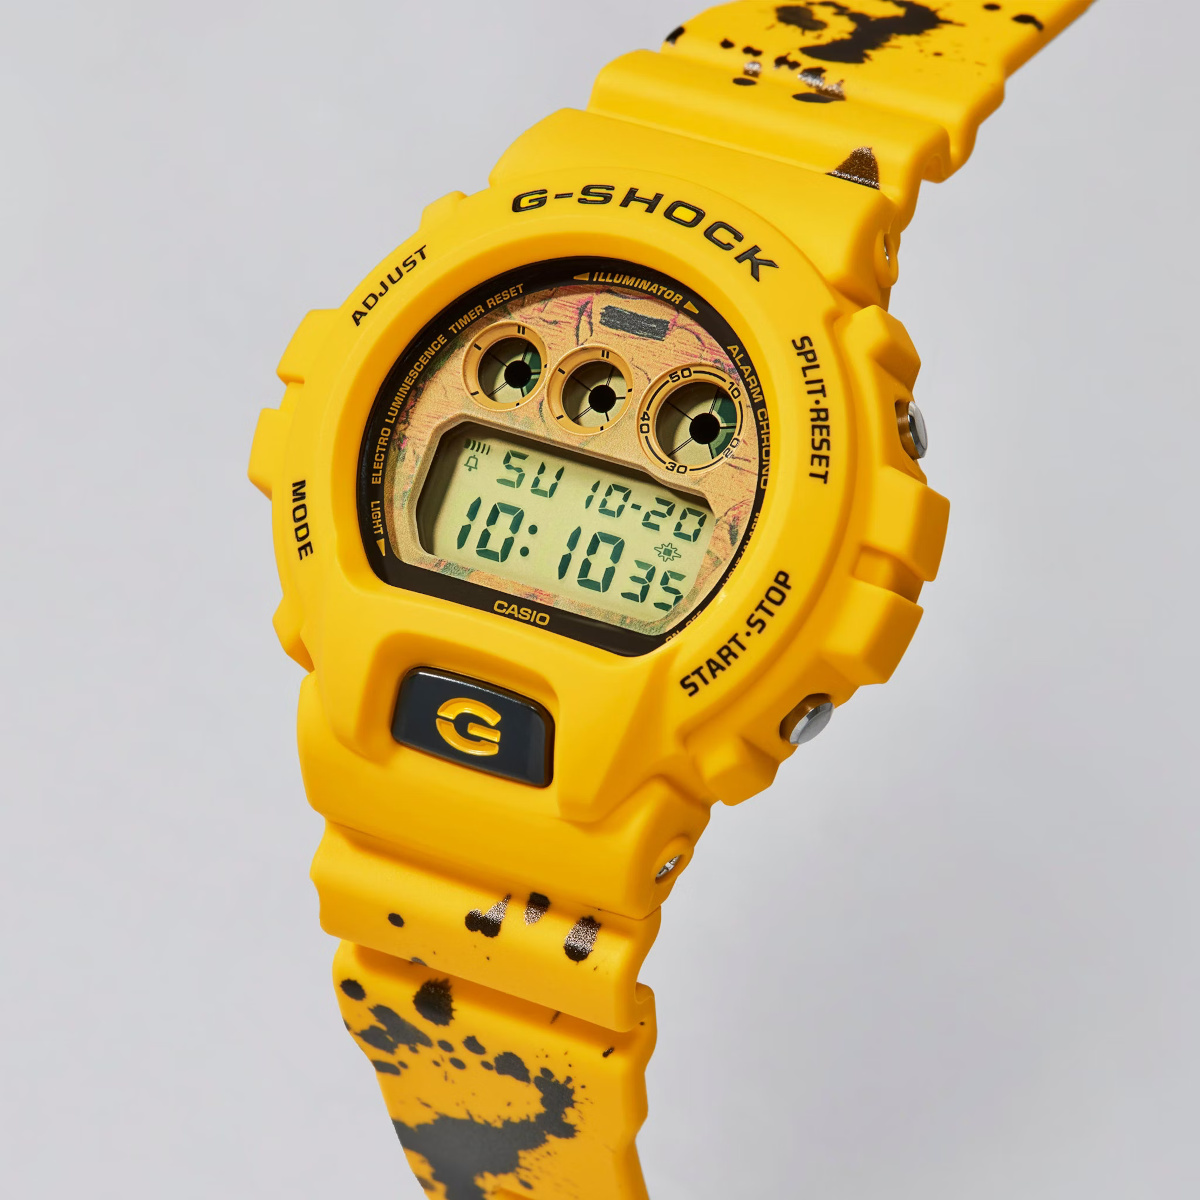 New Hodinkee G-Shock collaboration with Ed Sheeran is inspired by 